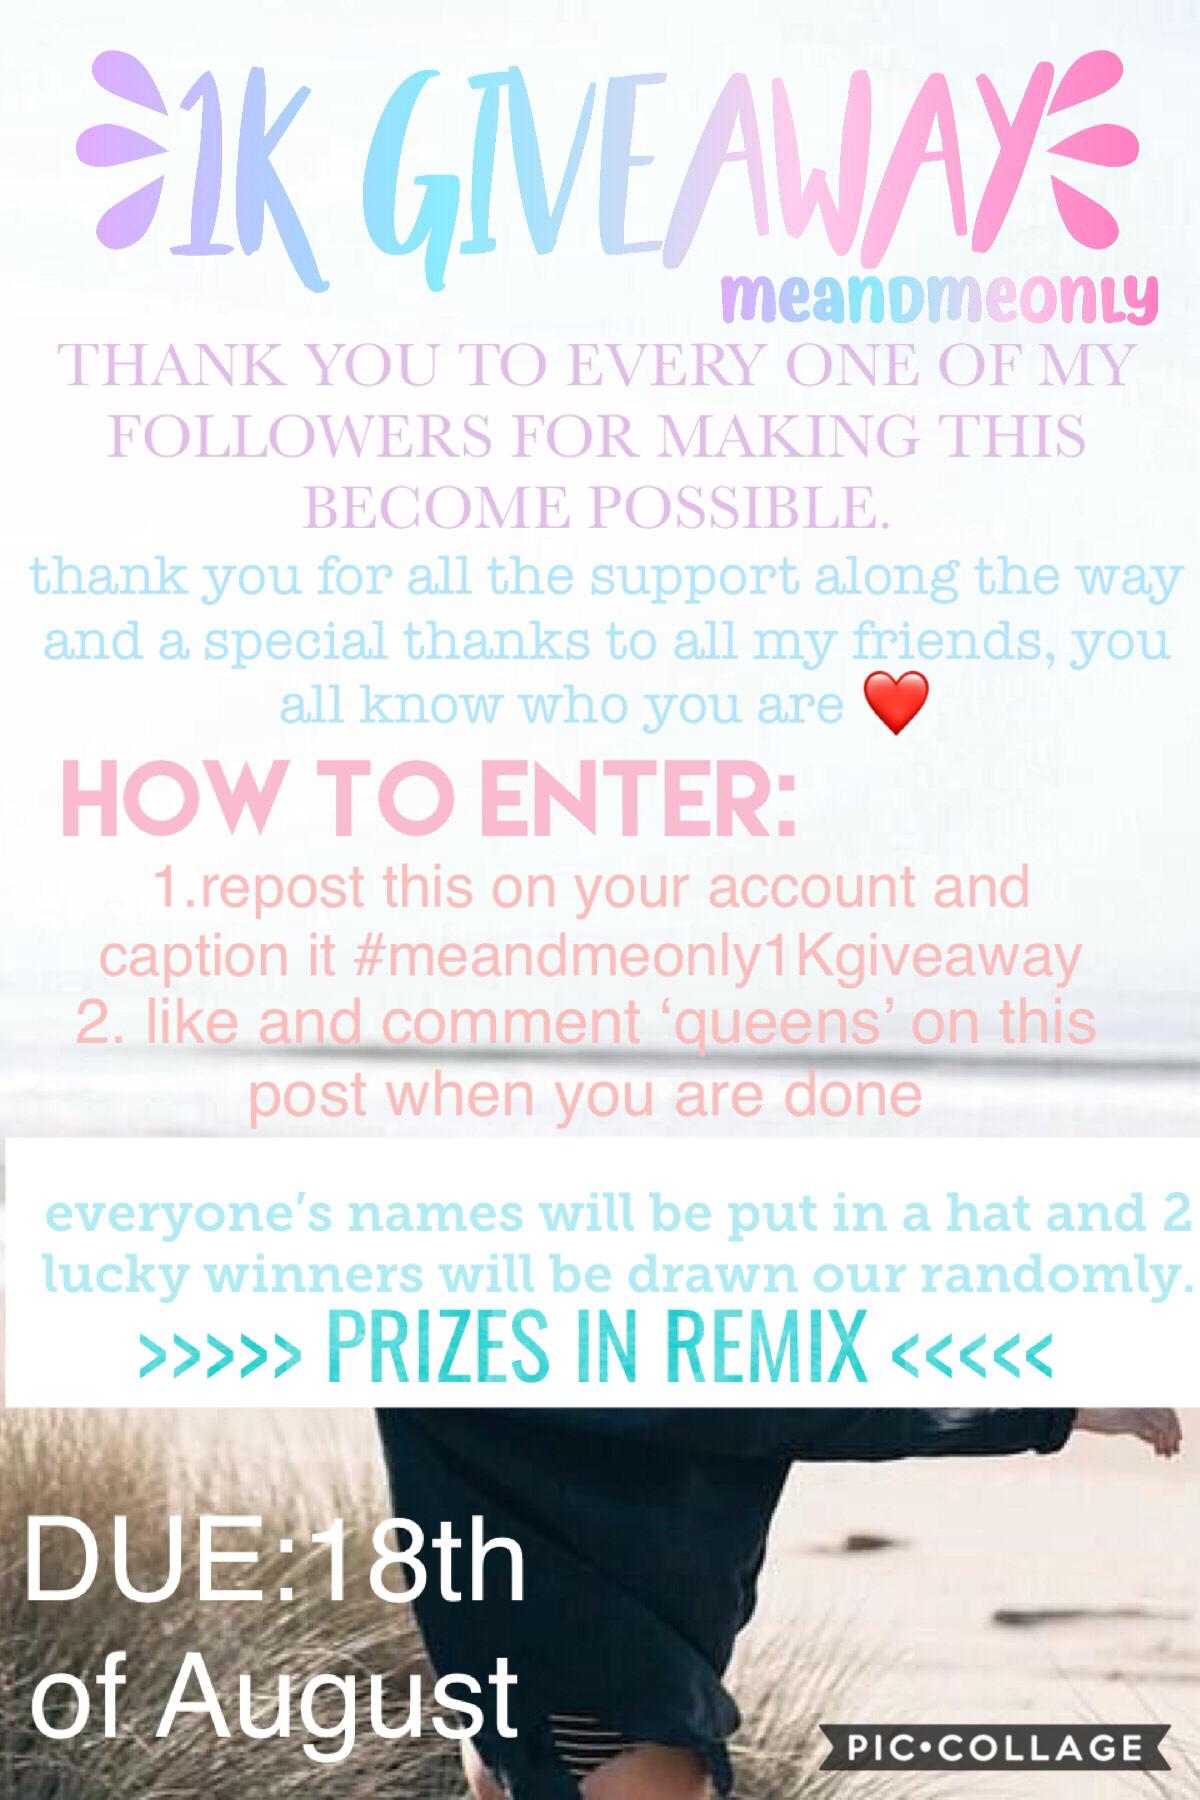 1K giveaway contest!! THANK YOU SO SO MUCH FOR 1K EVERYONE! I love all my followers, this made my day so i decided to do a giveaway to give back to y’all. please enter, there are such great prizes, prizes in remix btw. THANKS AGAIN❤️❤️ I can’t even believ